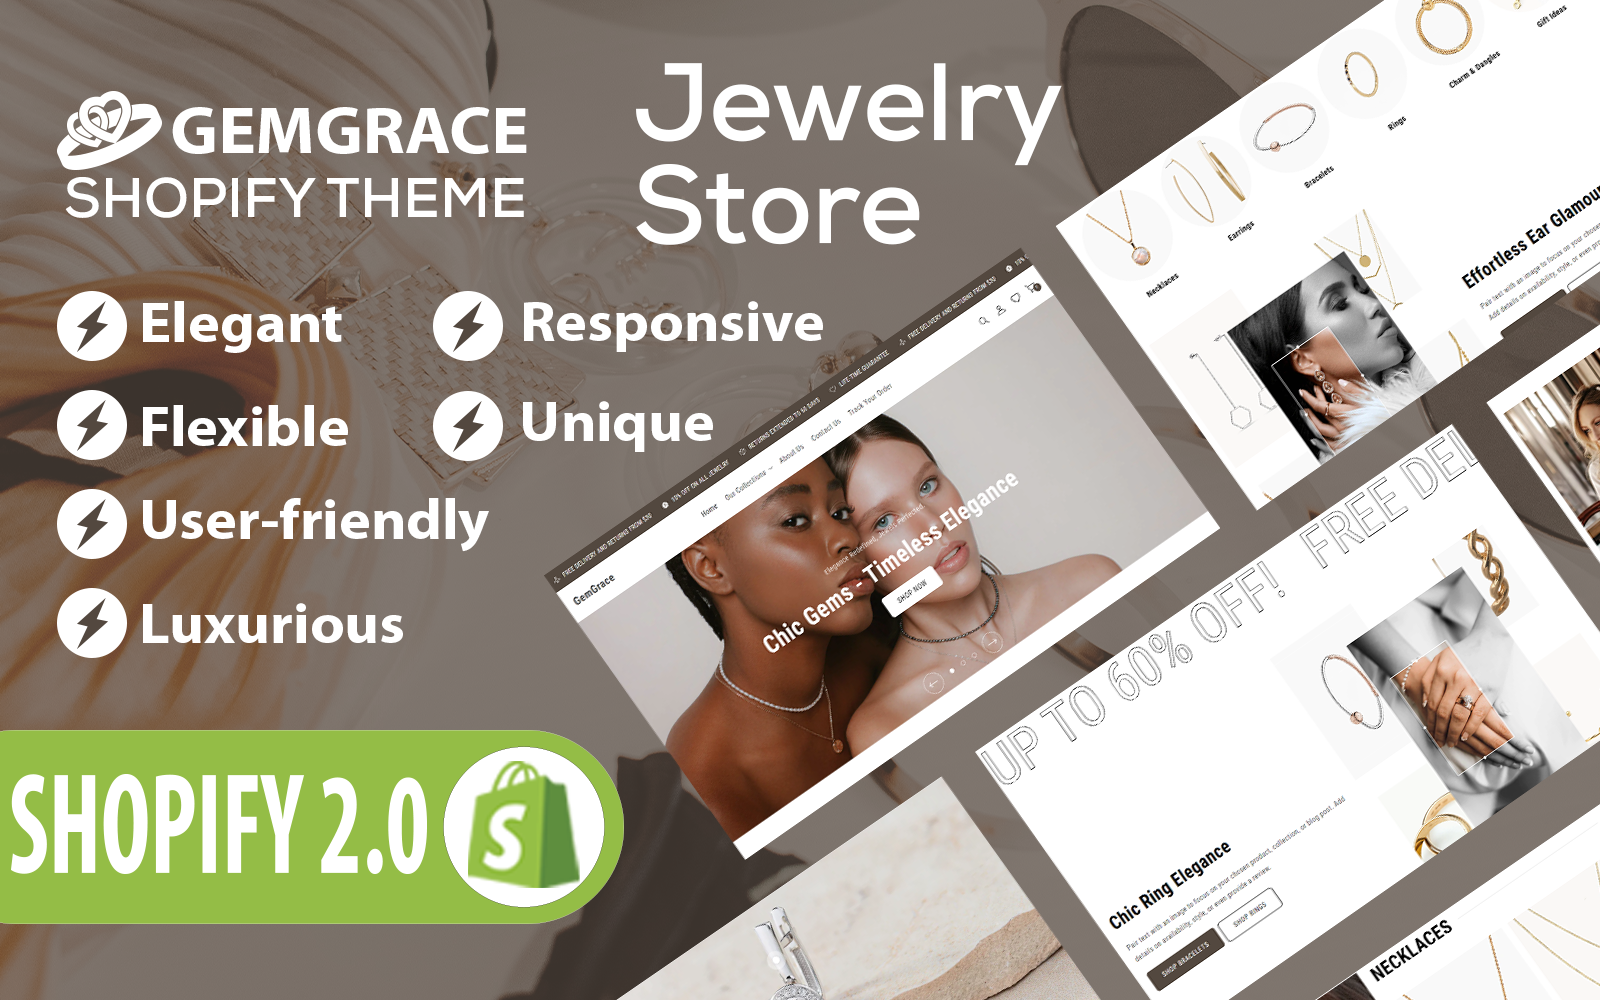 Template #385657 Fashion Jewellery Webdesign Template - Logo template Preview